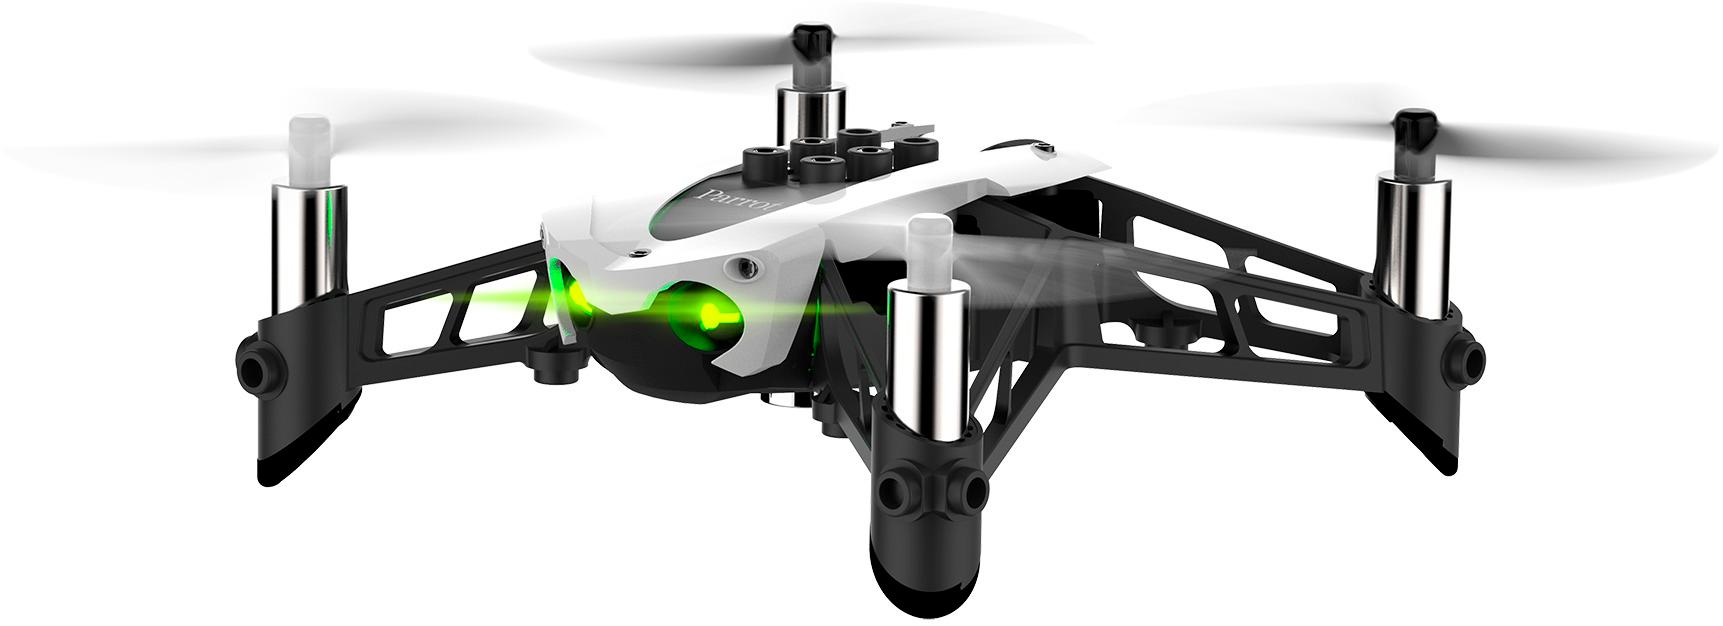 Best Buy: Parrot Mambo Fly Quadcopter Black and White 50014BBR